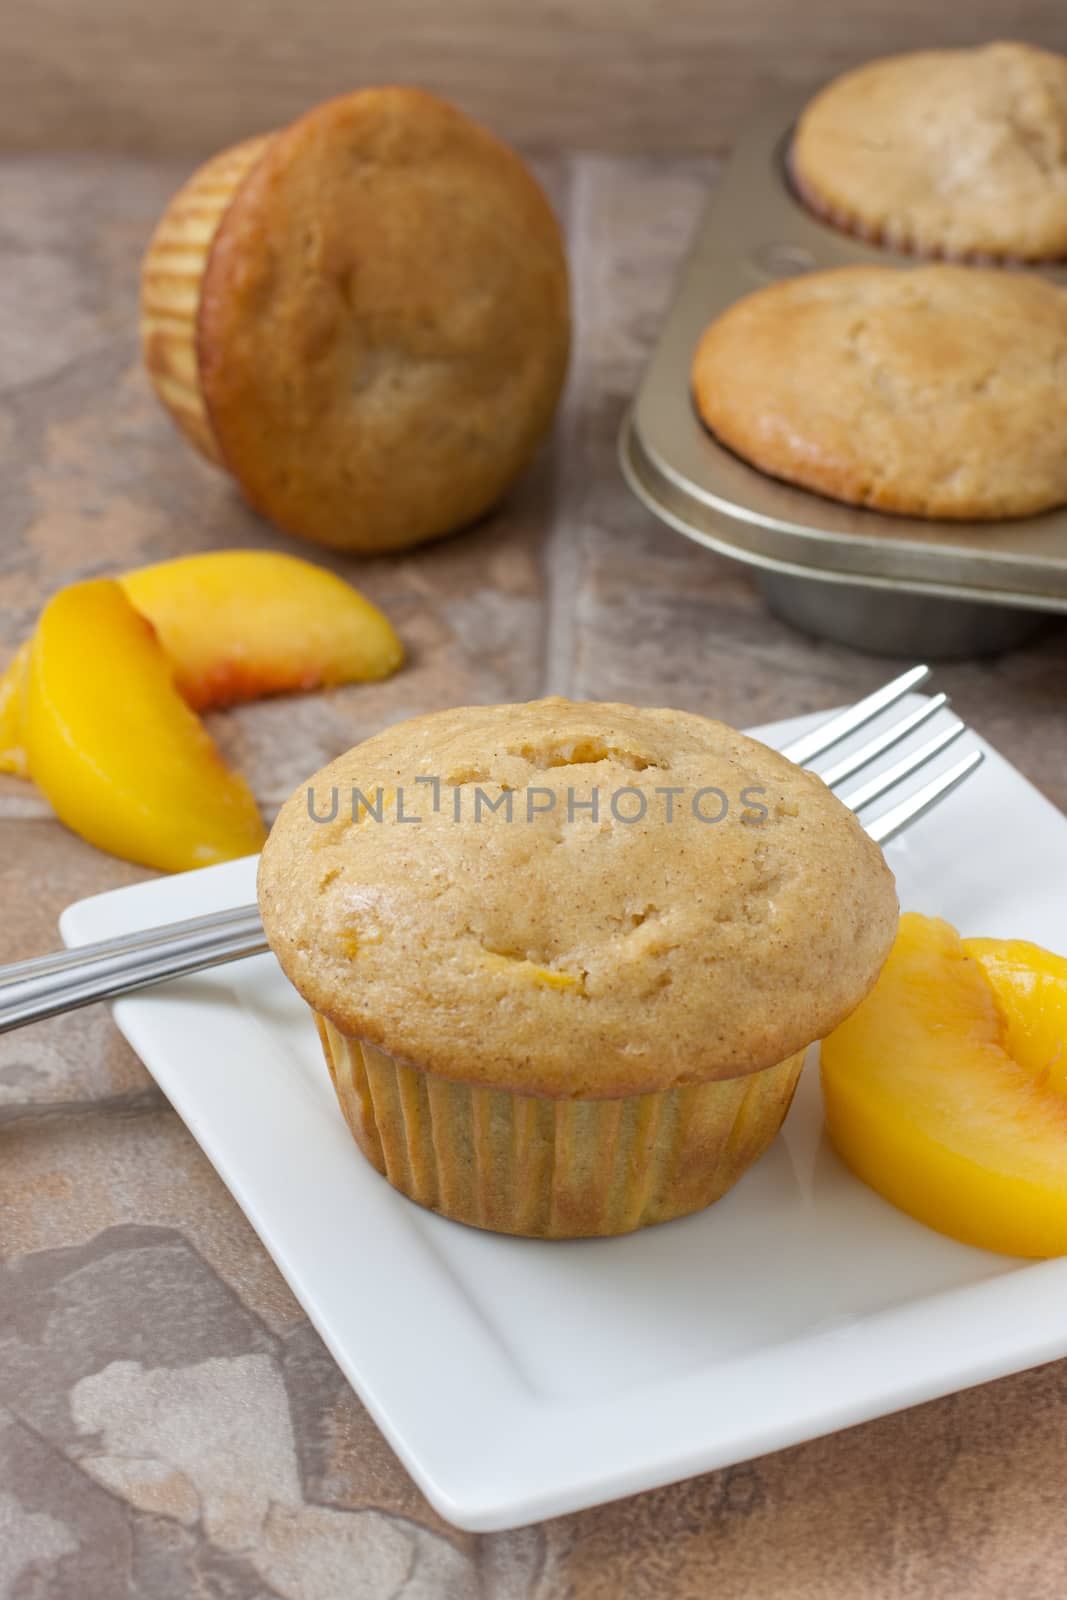 Peach Muffins by SouthernLightStudios